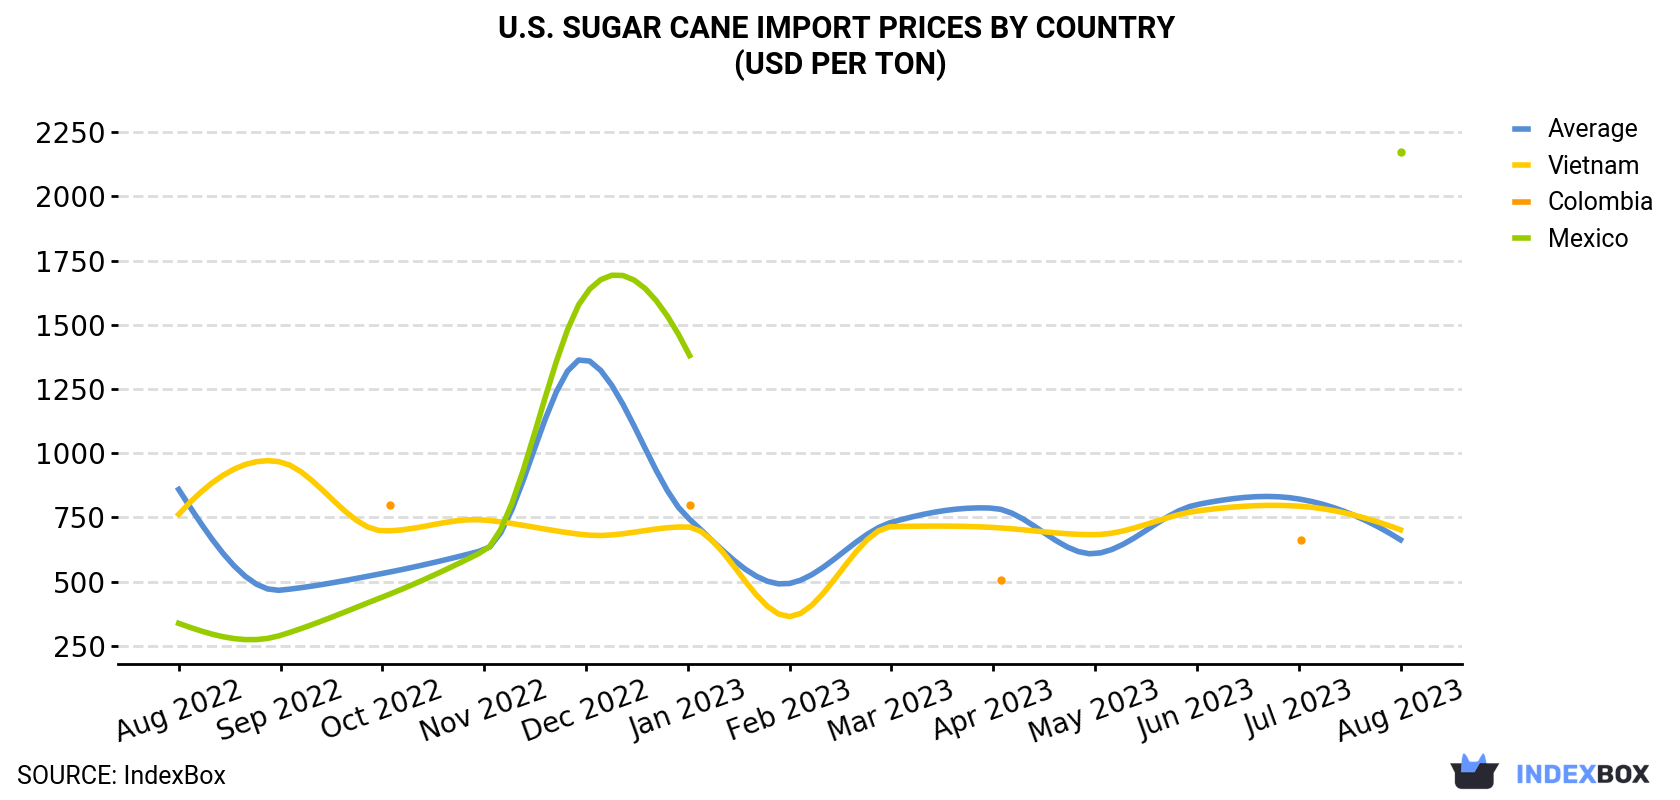 U.S. Sugar Cane Import Prices By Country (USD Per Ton)